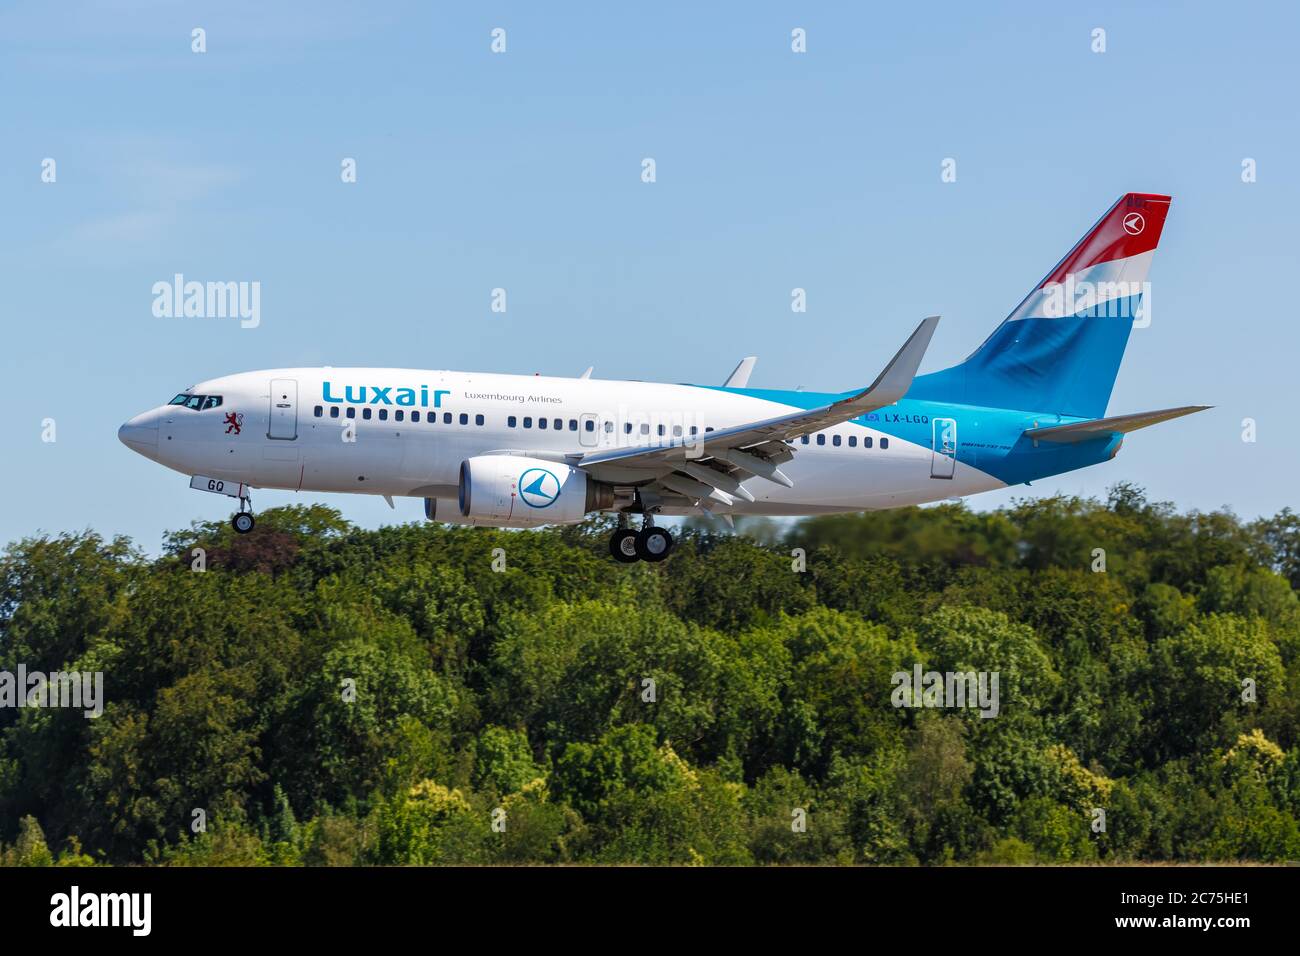 Findel, Luxembourg - June 24, 2020: Luxair Boeing 737-700 airplane at Findel airport (LUX) in Luxemburg. Boeing is an American aircraft manufacturer h Stock Photo